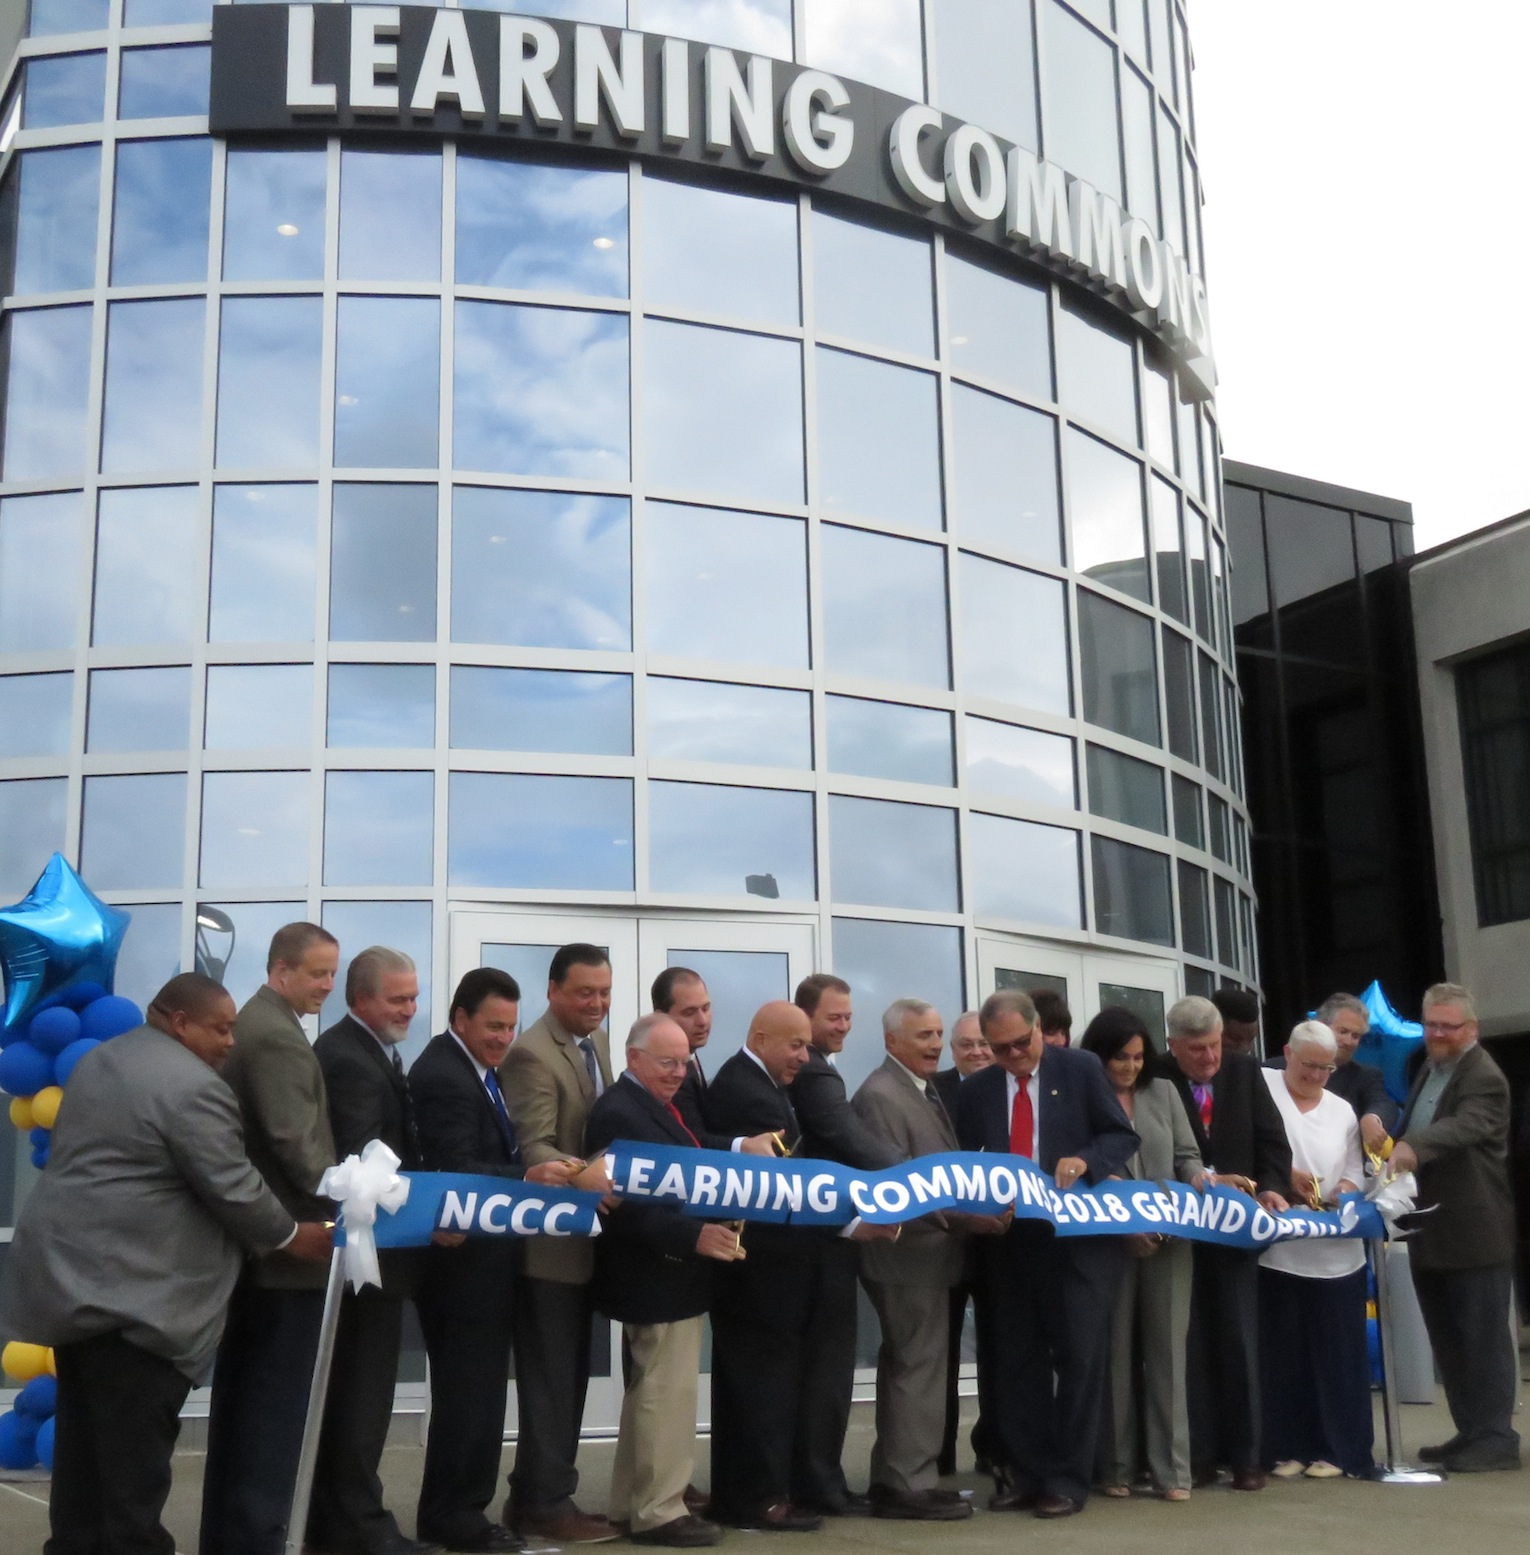 Niagara County Community College trustees, elected officials and more cut the ribbon to the new Learning Commons facility at the Sanborn campus. (Photos by David Yarger)